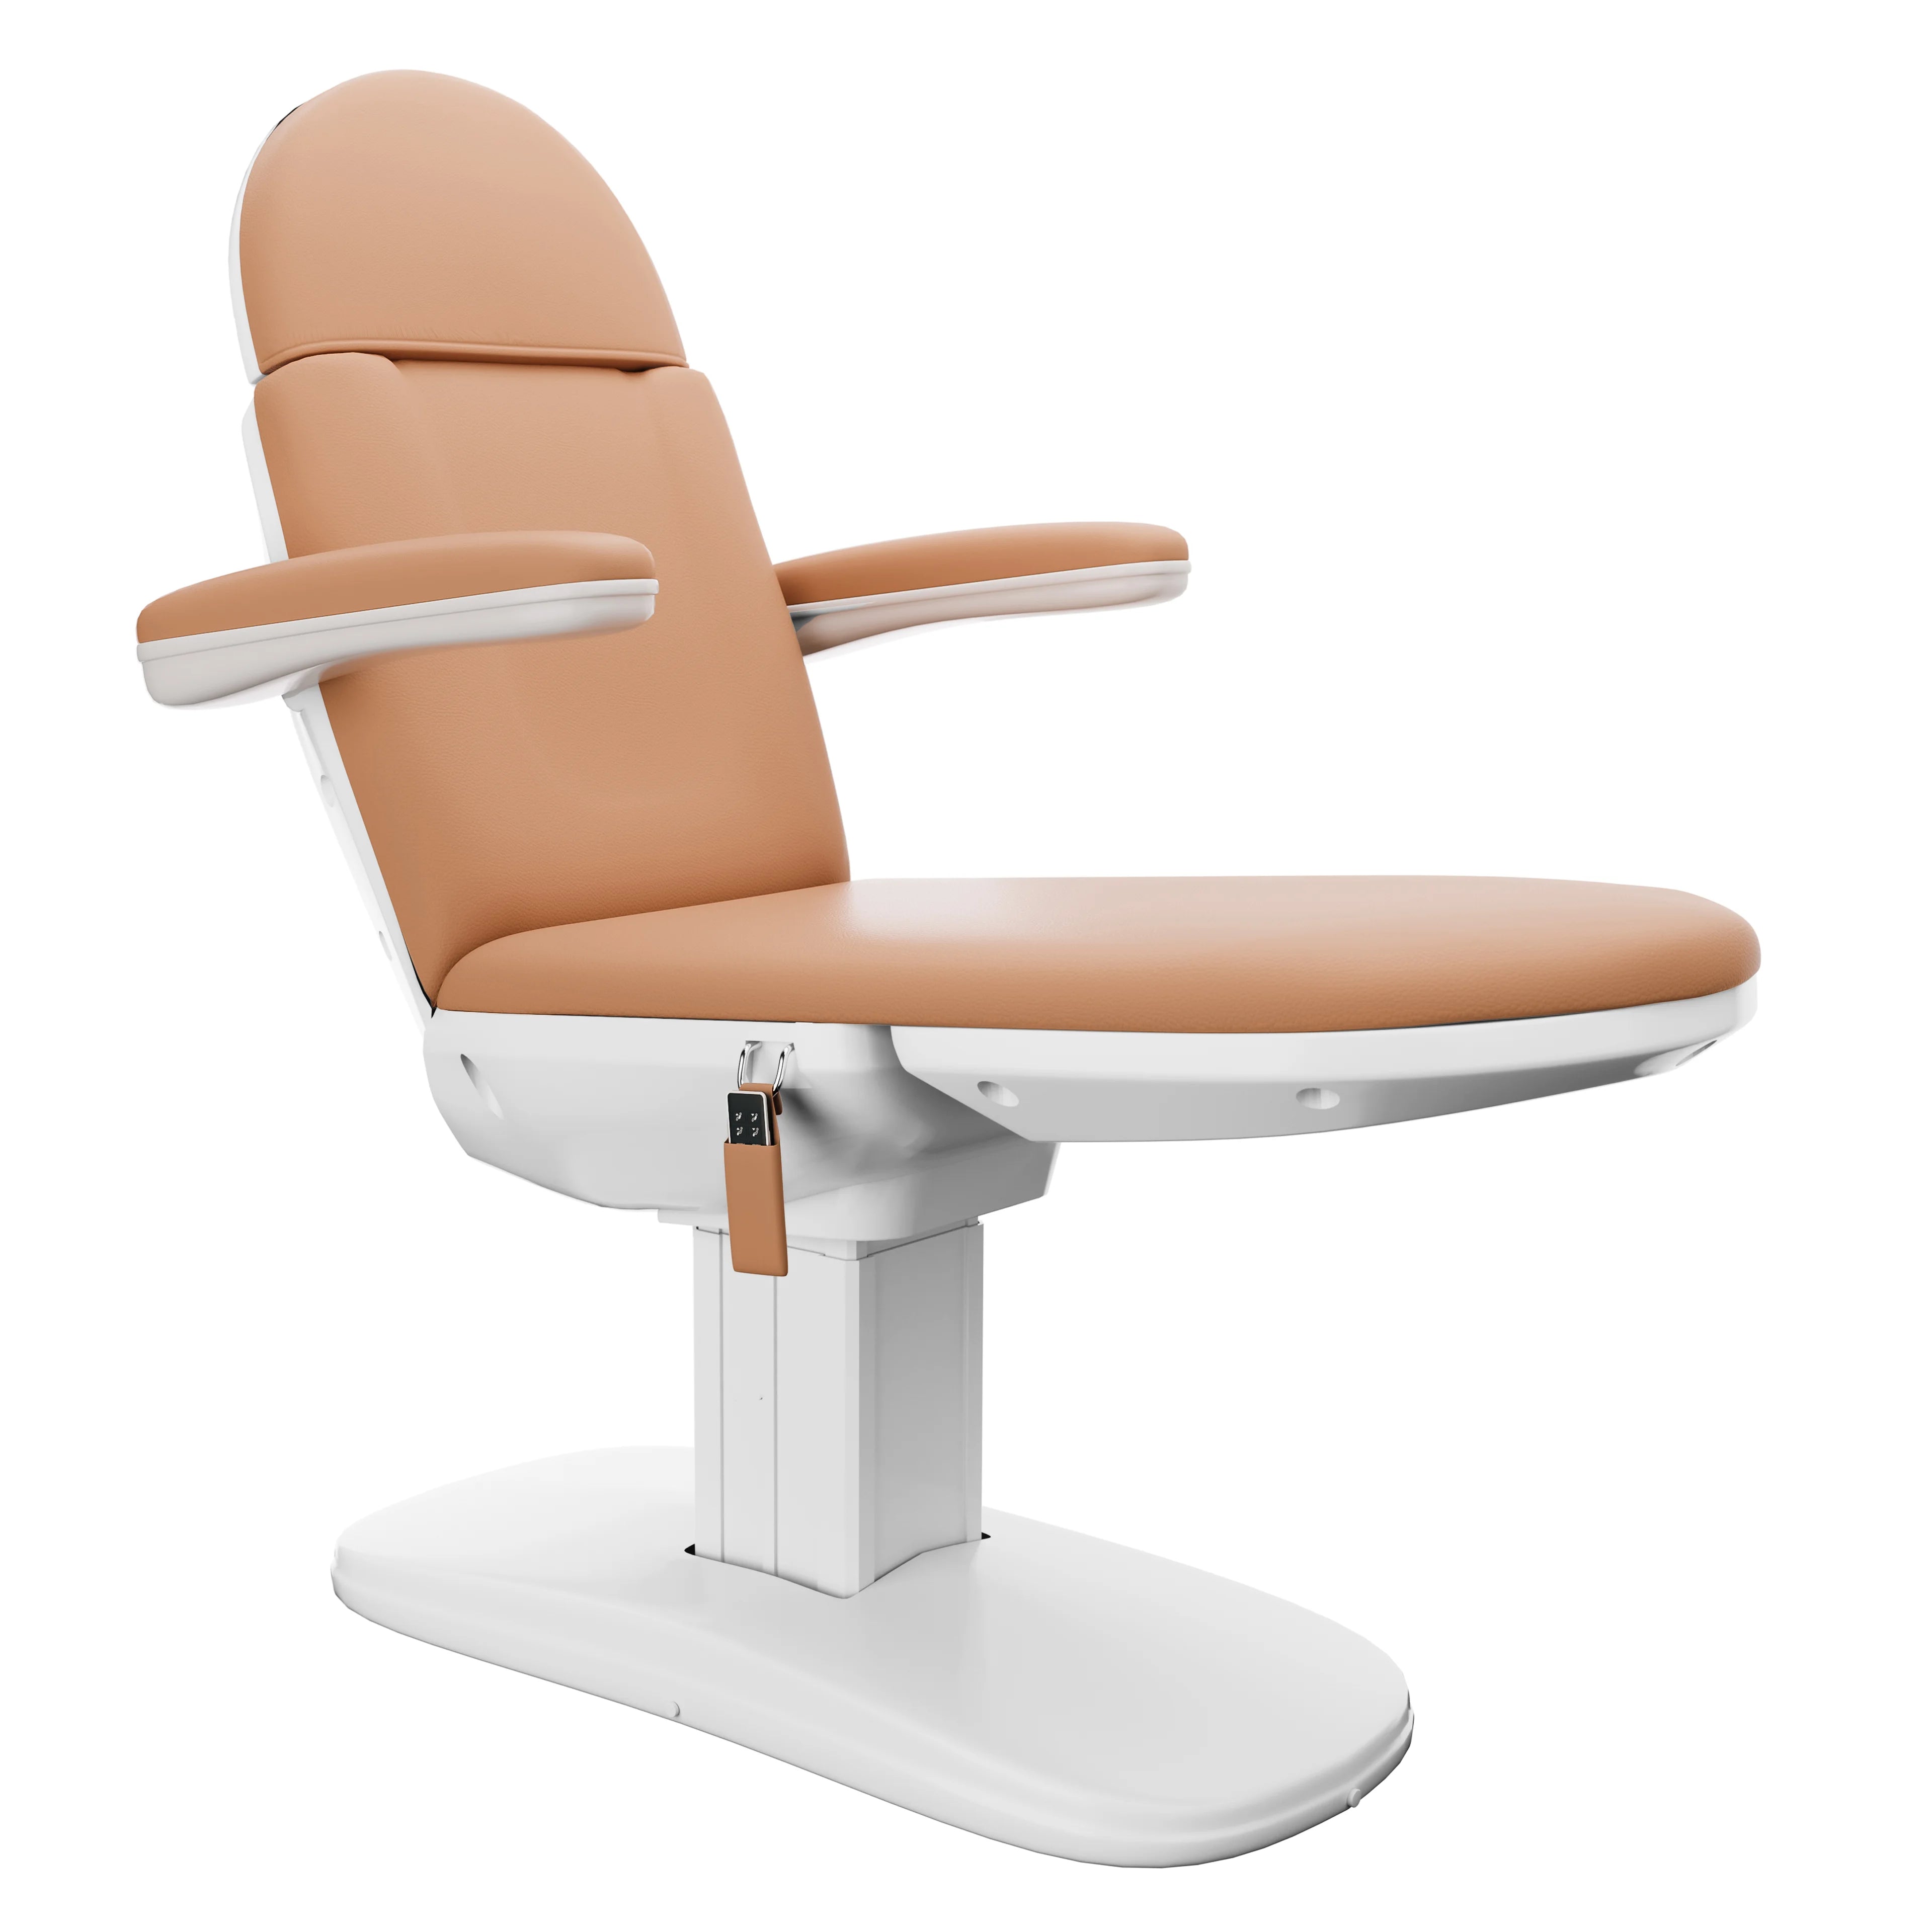 SpaMarc . Benefic . 4 Motor Spa Treatment Chair/Bed . (Wireless Remote)